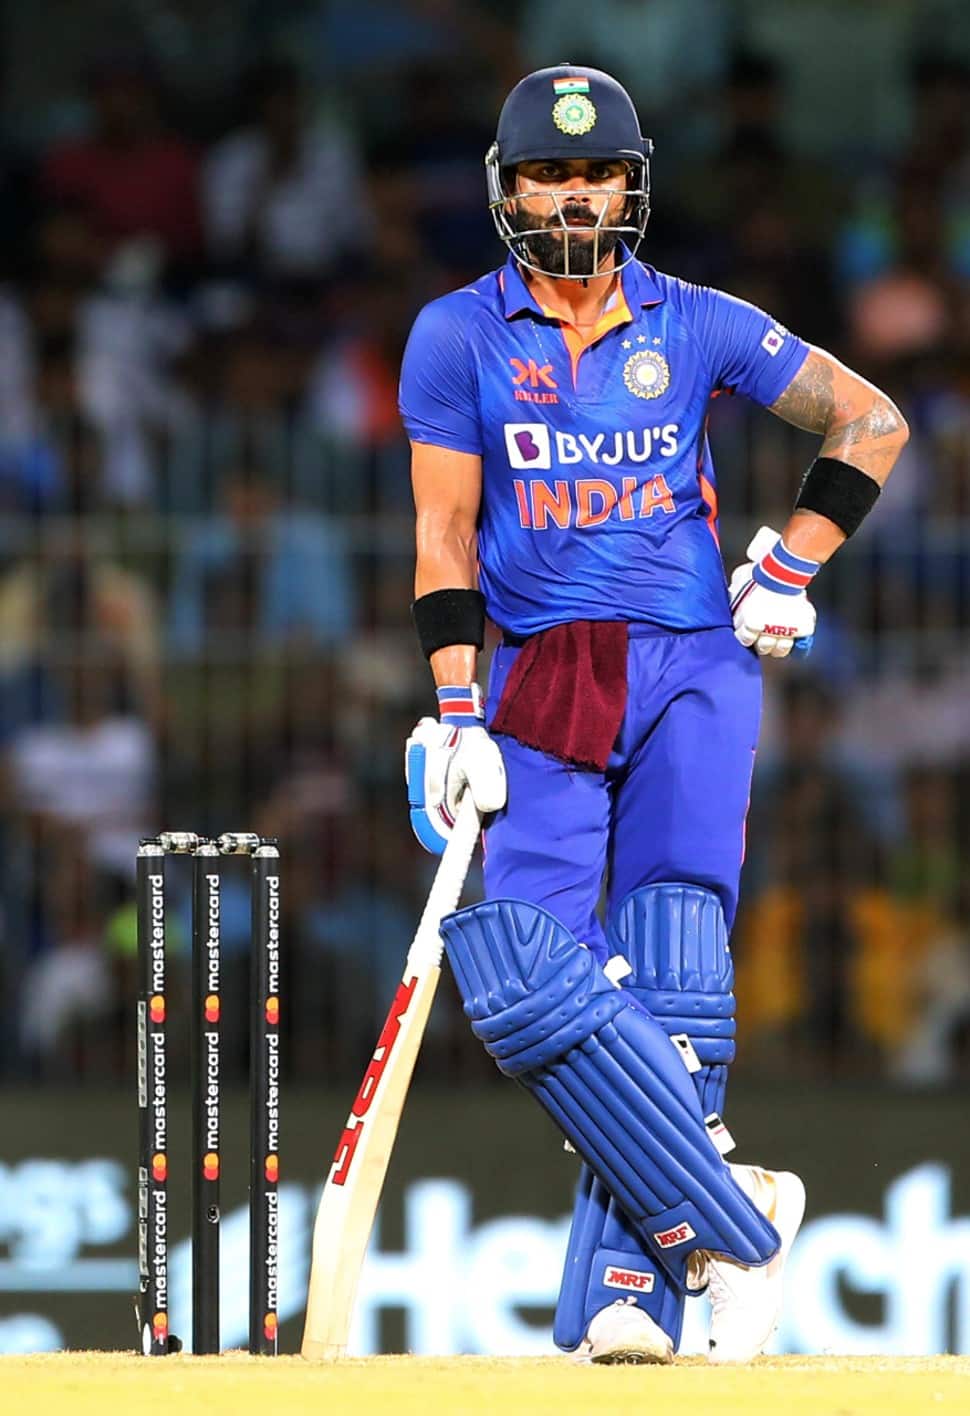 Former India captain Virat Kohli has a batting average of 57.32 in ODI cricket, the highest-ever in this format. Kohli needs 102 more runs to complete 13,000 runs in ODI cricket and become the fastest batter to achieve this feet. (Photo: ANI)